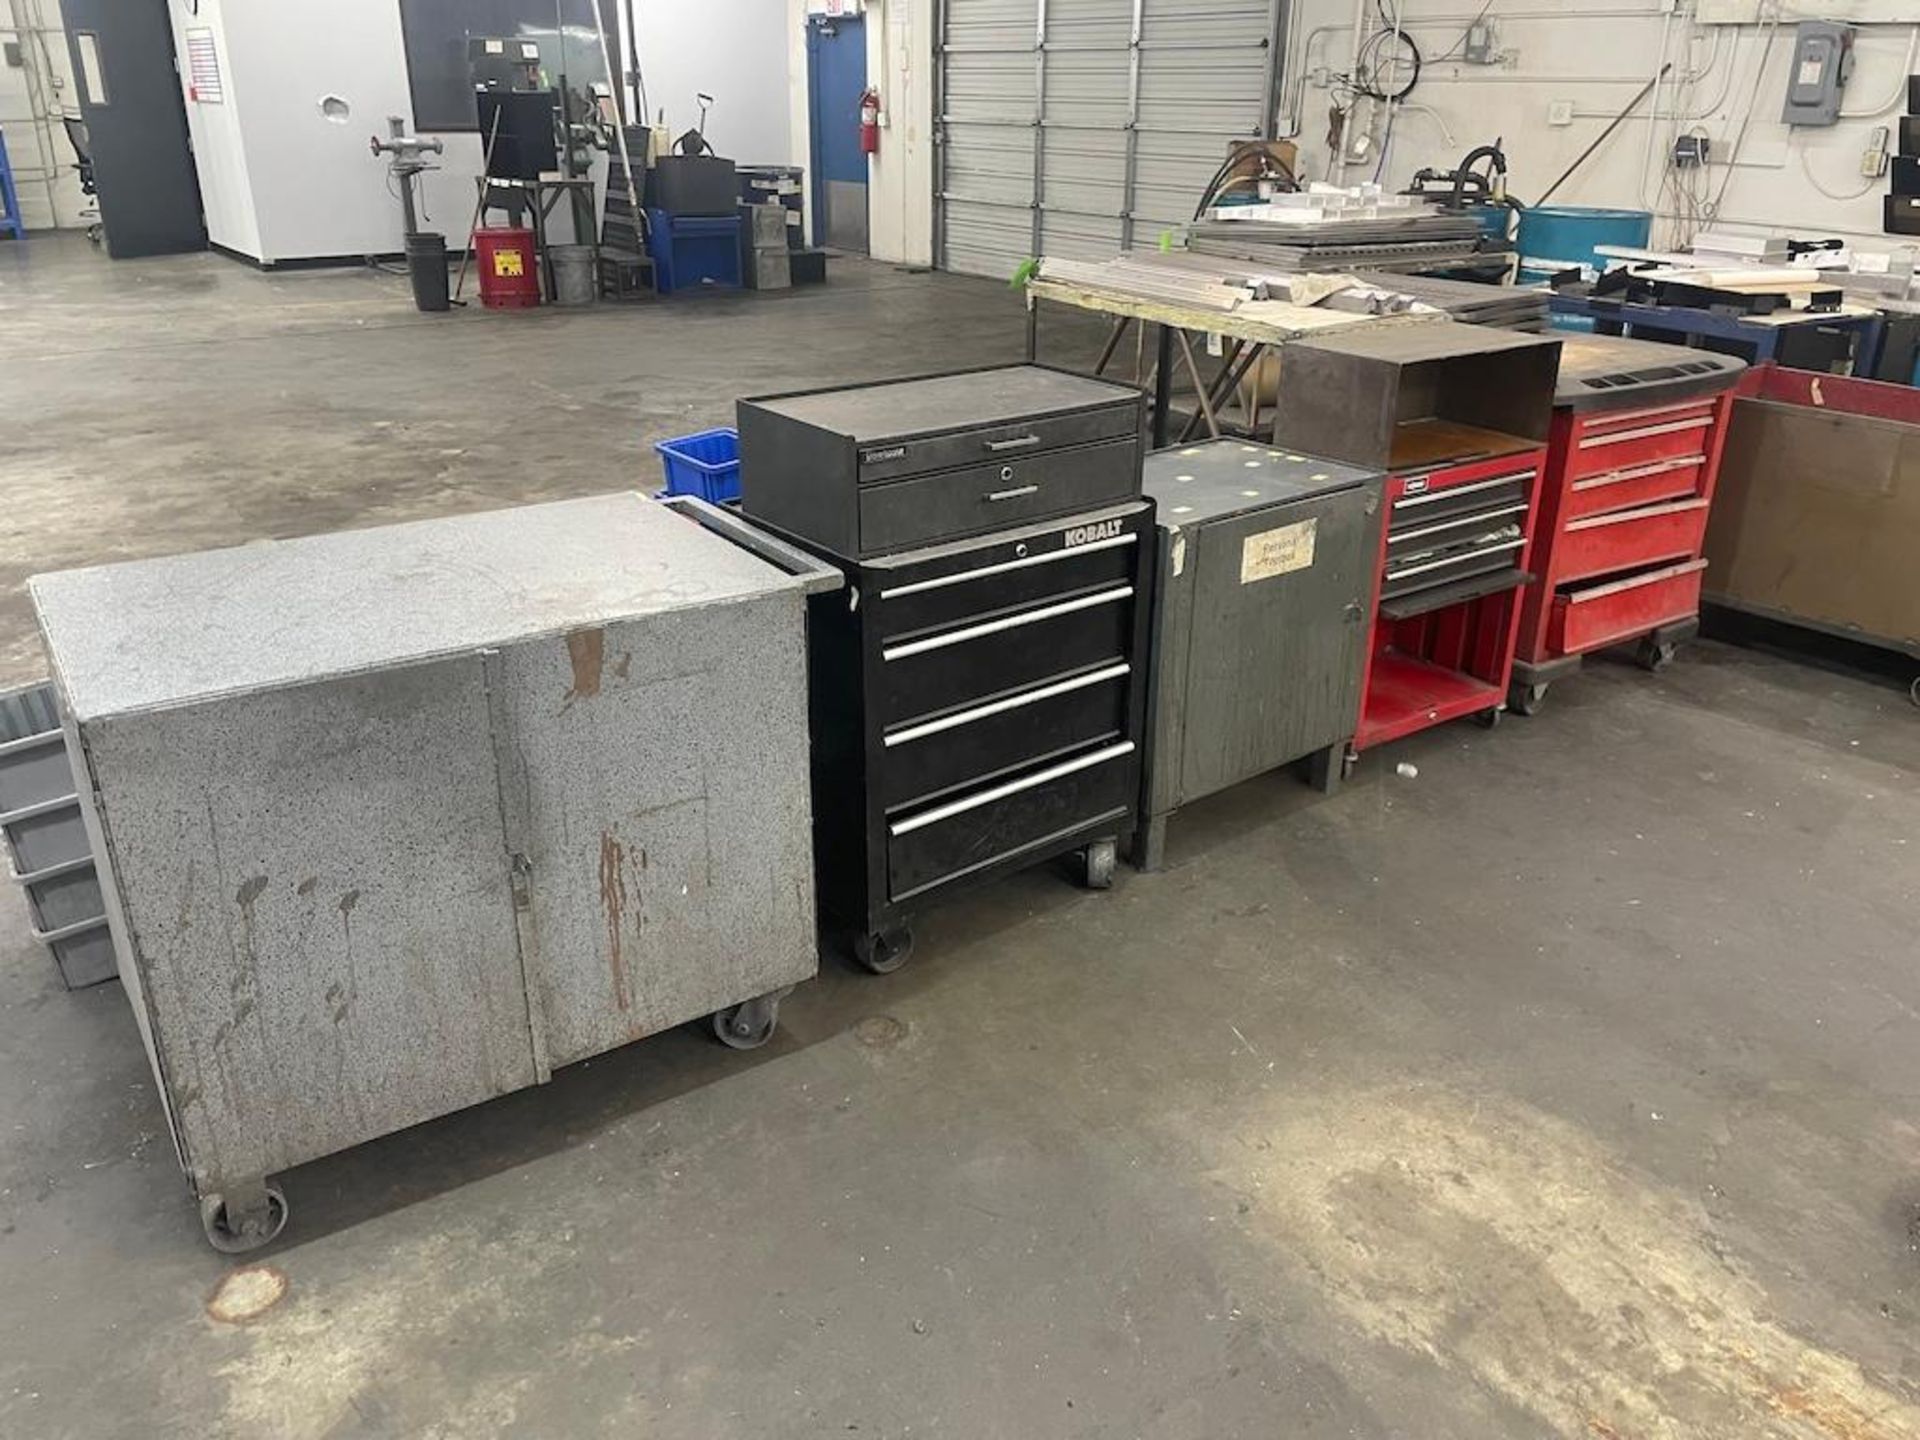 LOT 3 TOOL BOXES AND 2 CARTS